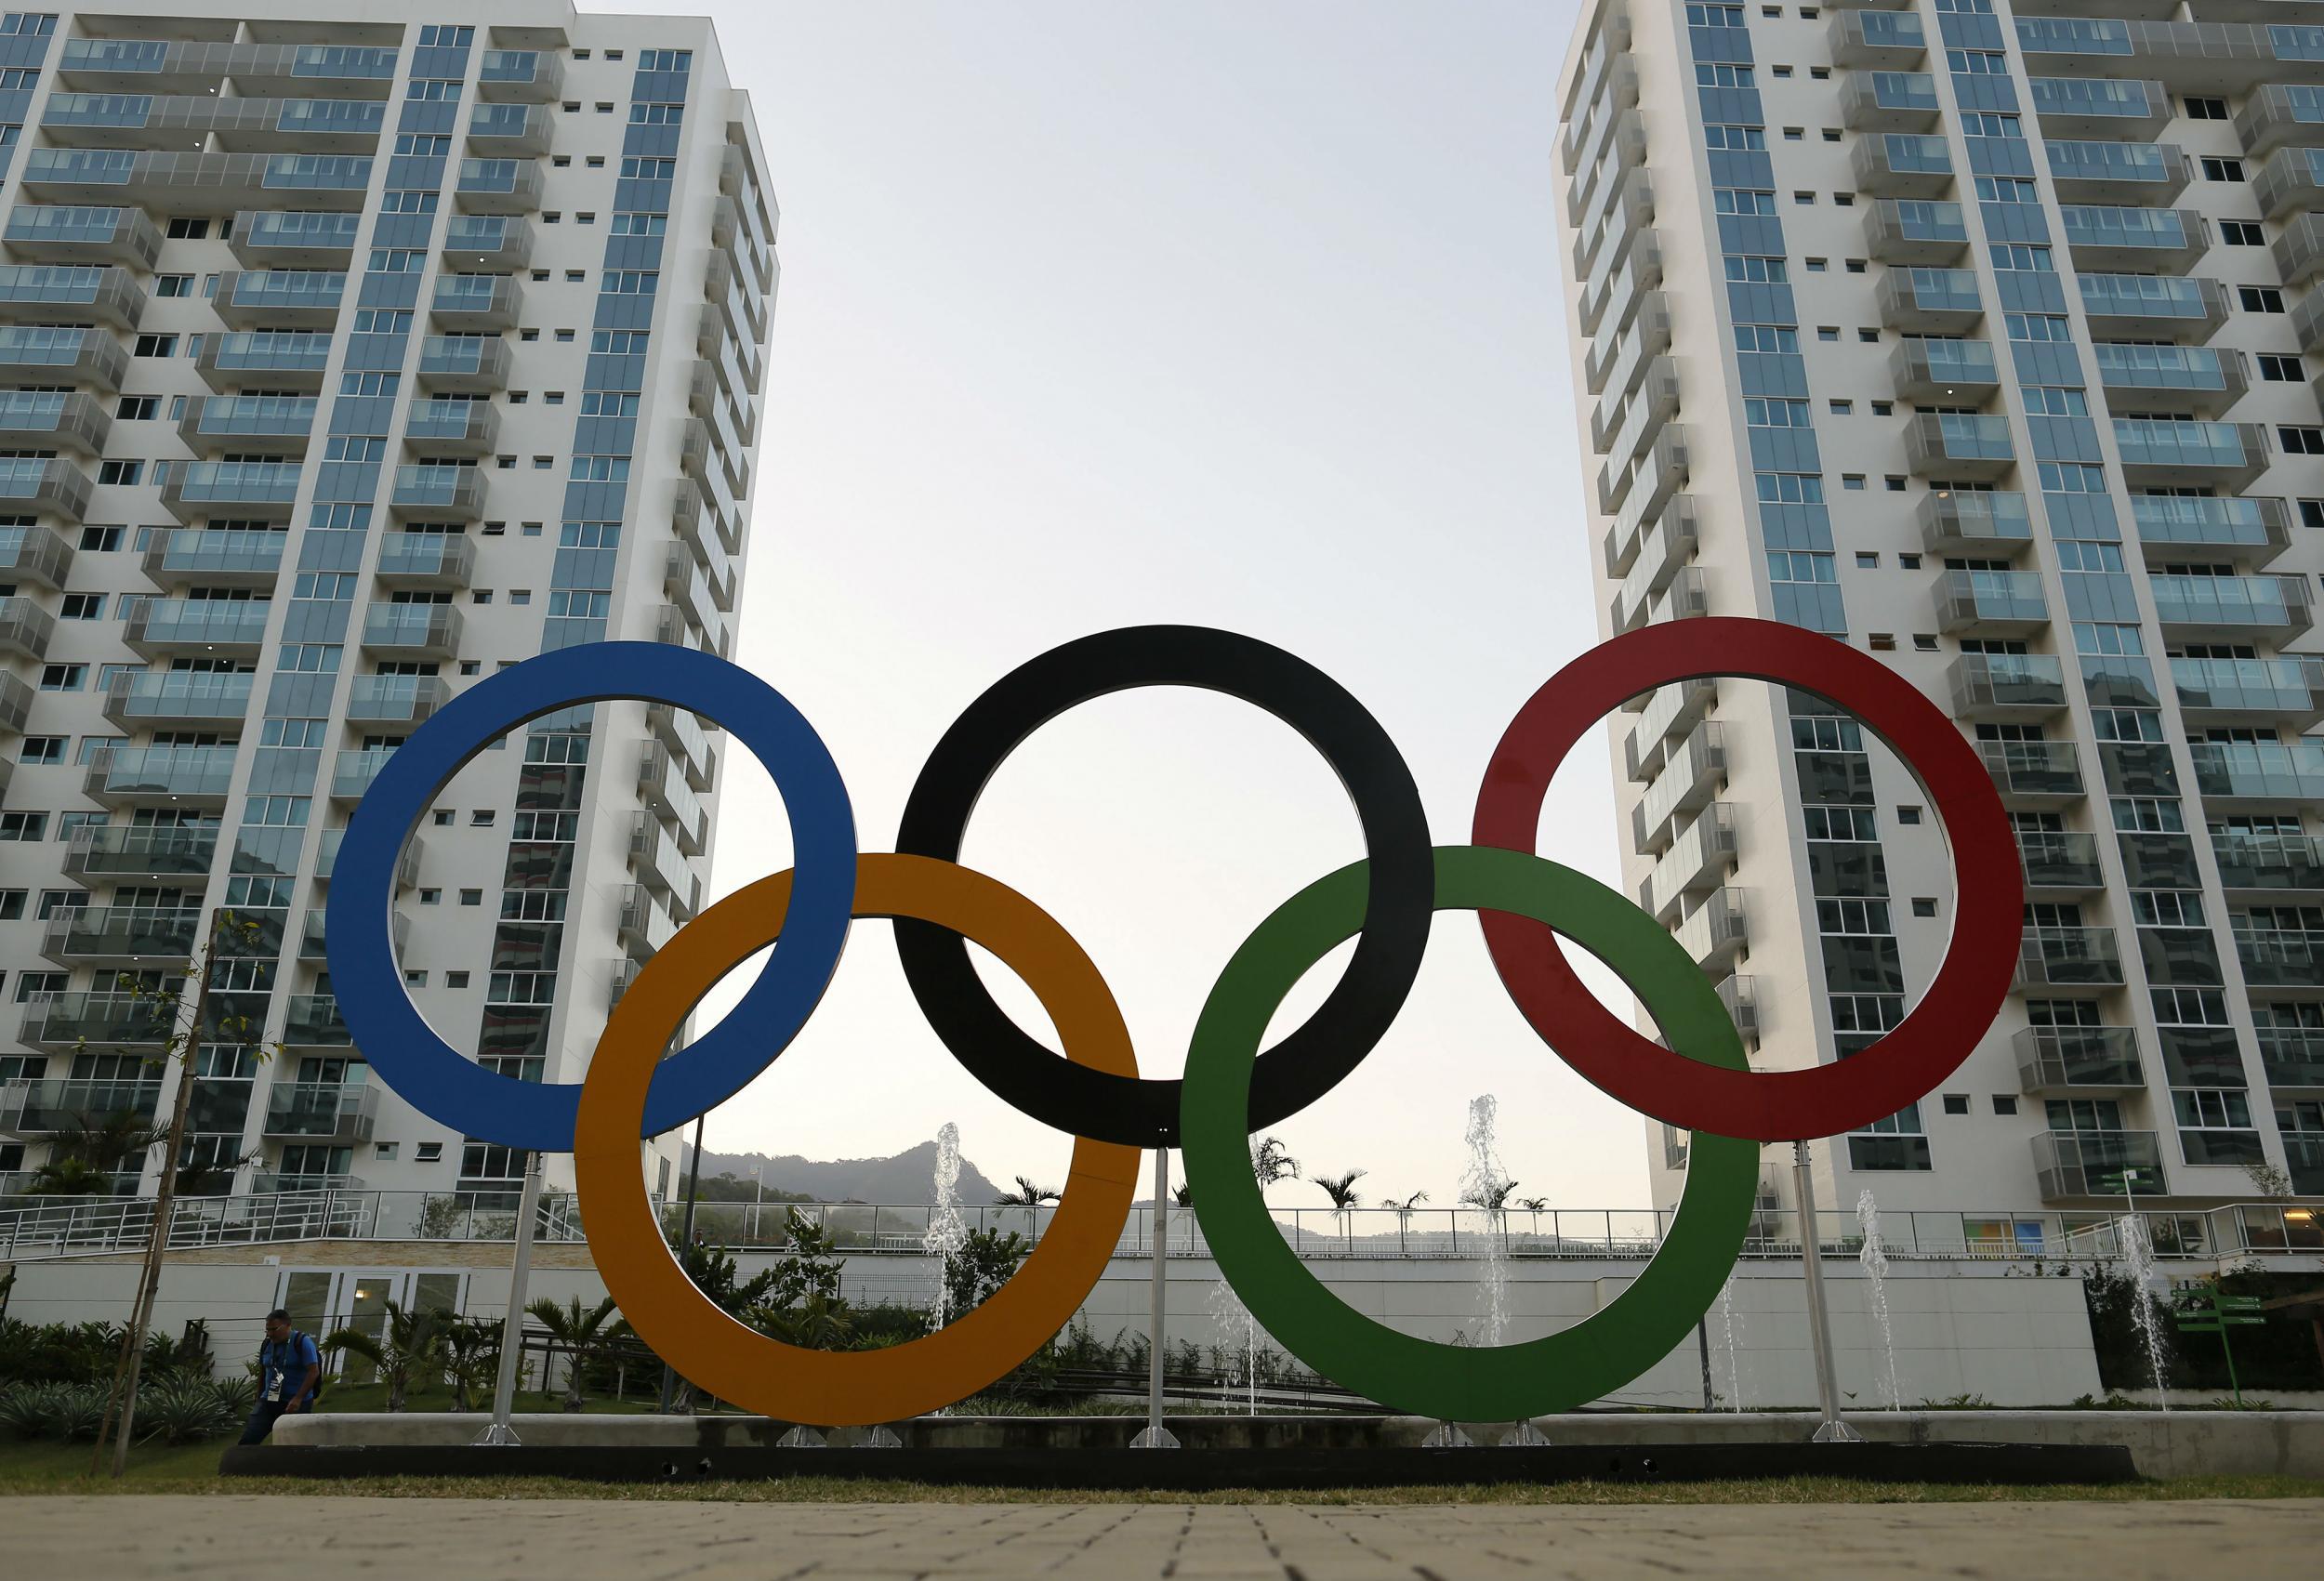 The article investigated the ease of hooking up in the athletes' village